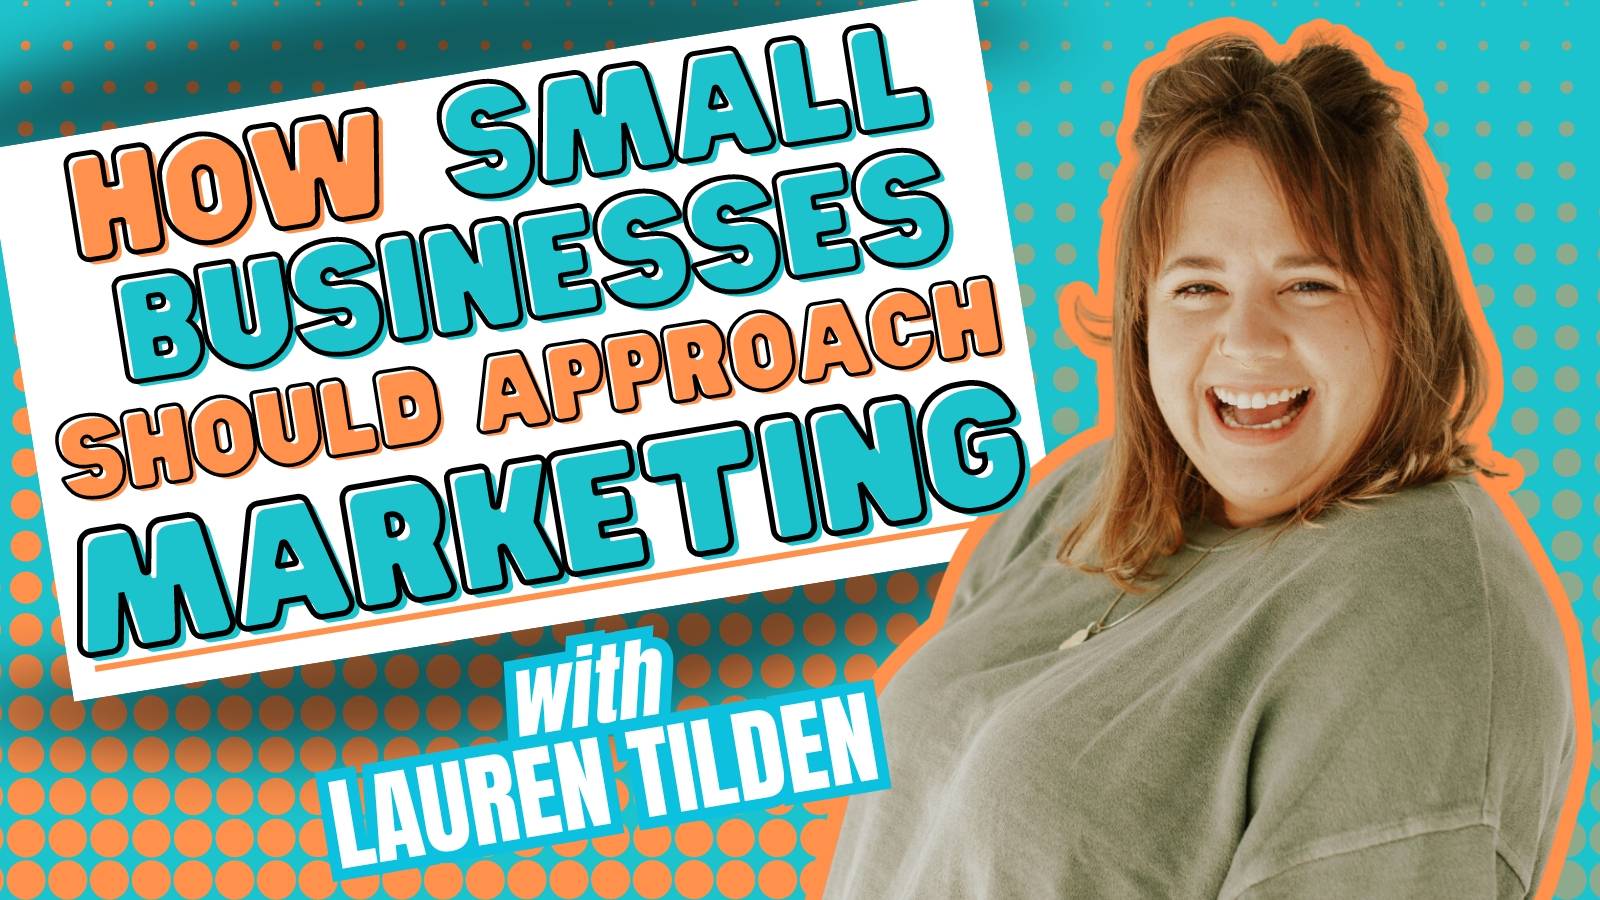 How Small Businesses Should Approach Marketing with Lauren Tilden